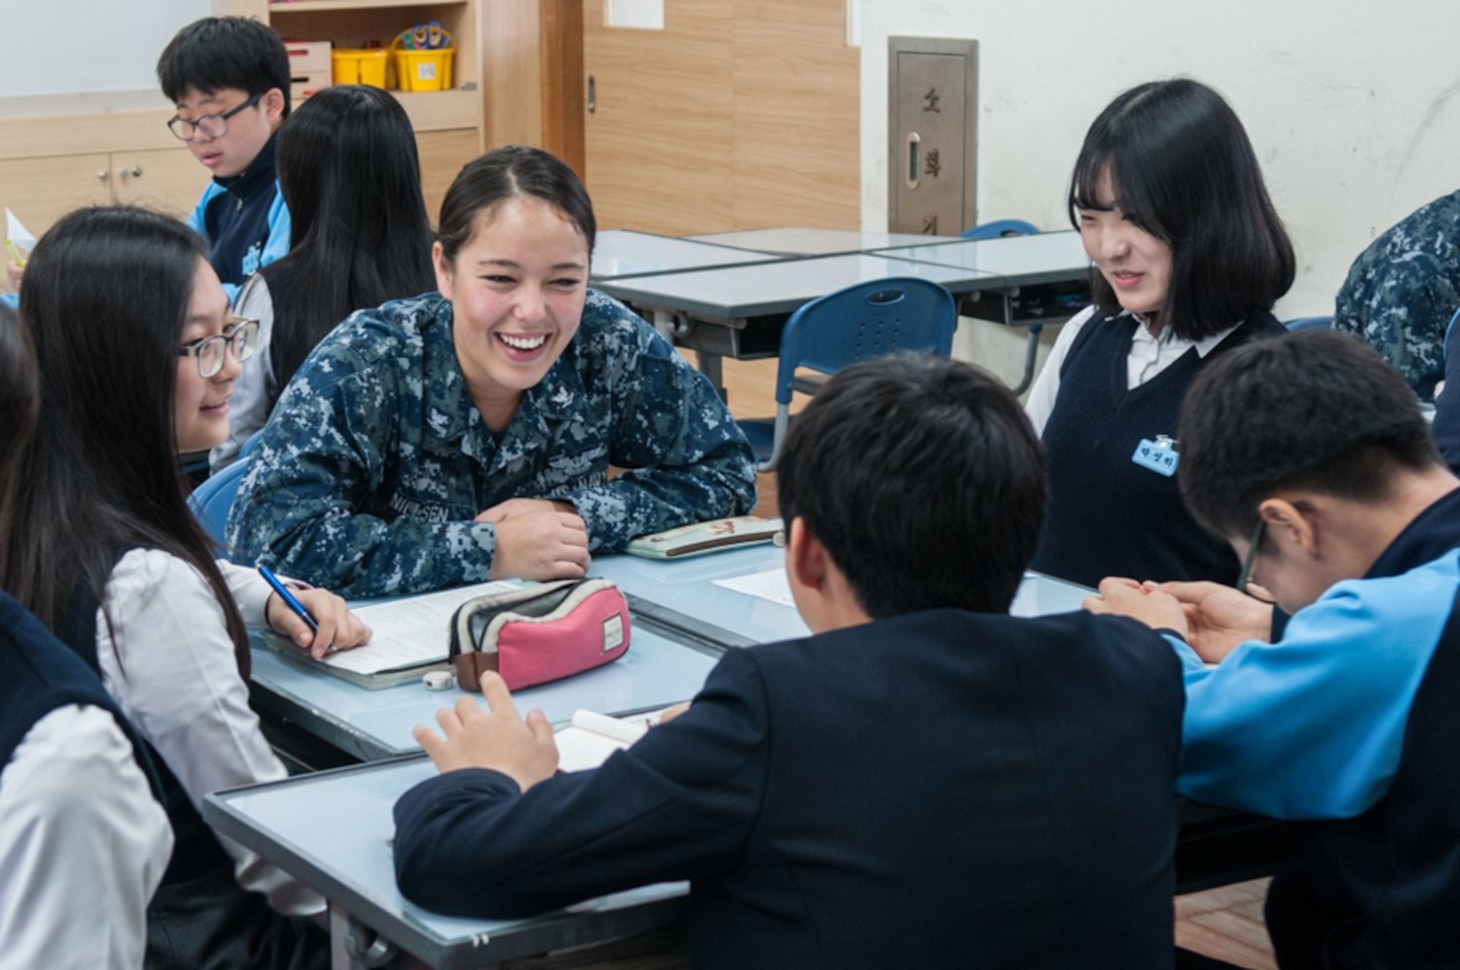 BUSAN, Republic of Korea (Oct. 19, 2016) - Petty Officer 3rd Class (AW) Risa Nielsen, from Oxnard, California, assigned to the Navy’s only forward-deployed aircraft carrier, USS Ronald Reagan (CVN 76), participates in a cultural exchange with students during a community relations event at Daecheon Middle School. Ronald Reagan is on patrol with Carrier Strike Group 5 supporting security and stability in the Indo-Asia-Pacific region.